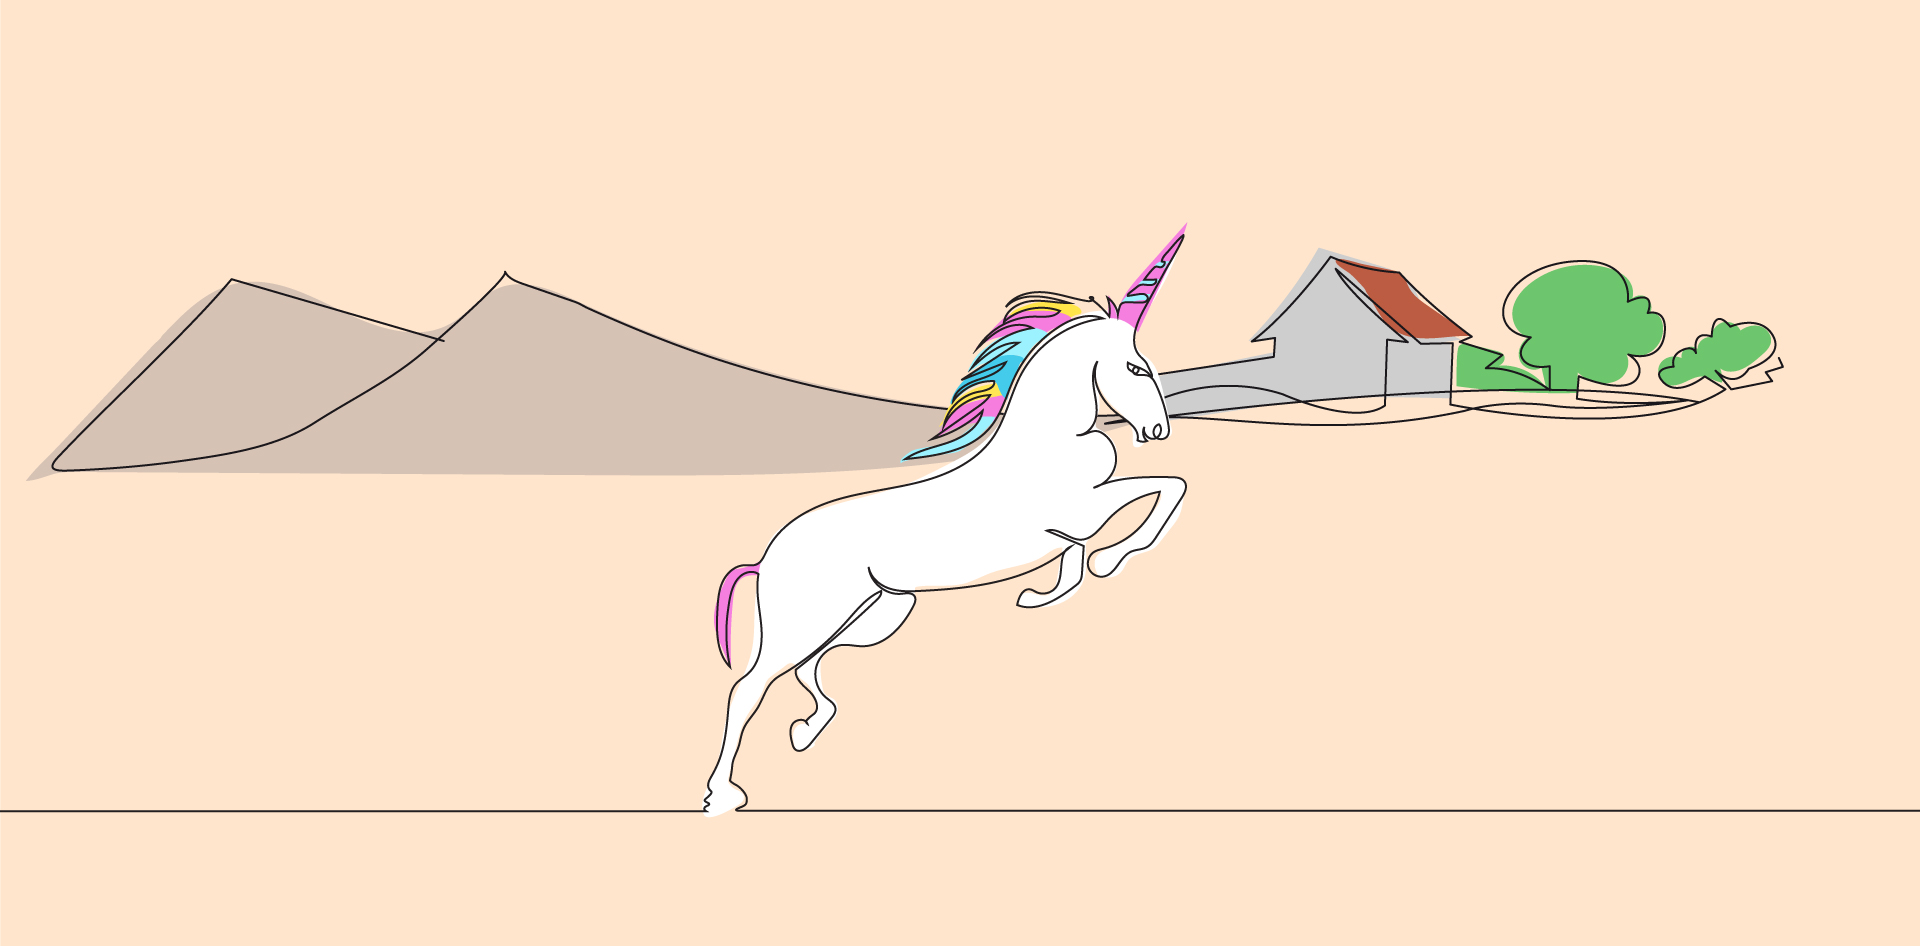 Pros and Cons of Managing a Unicorn Farm